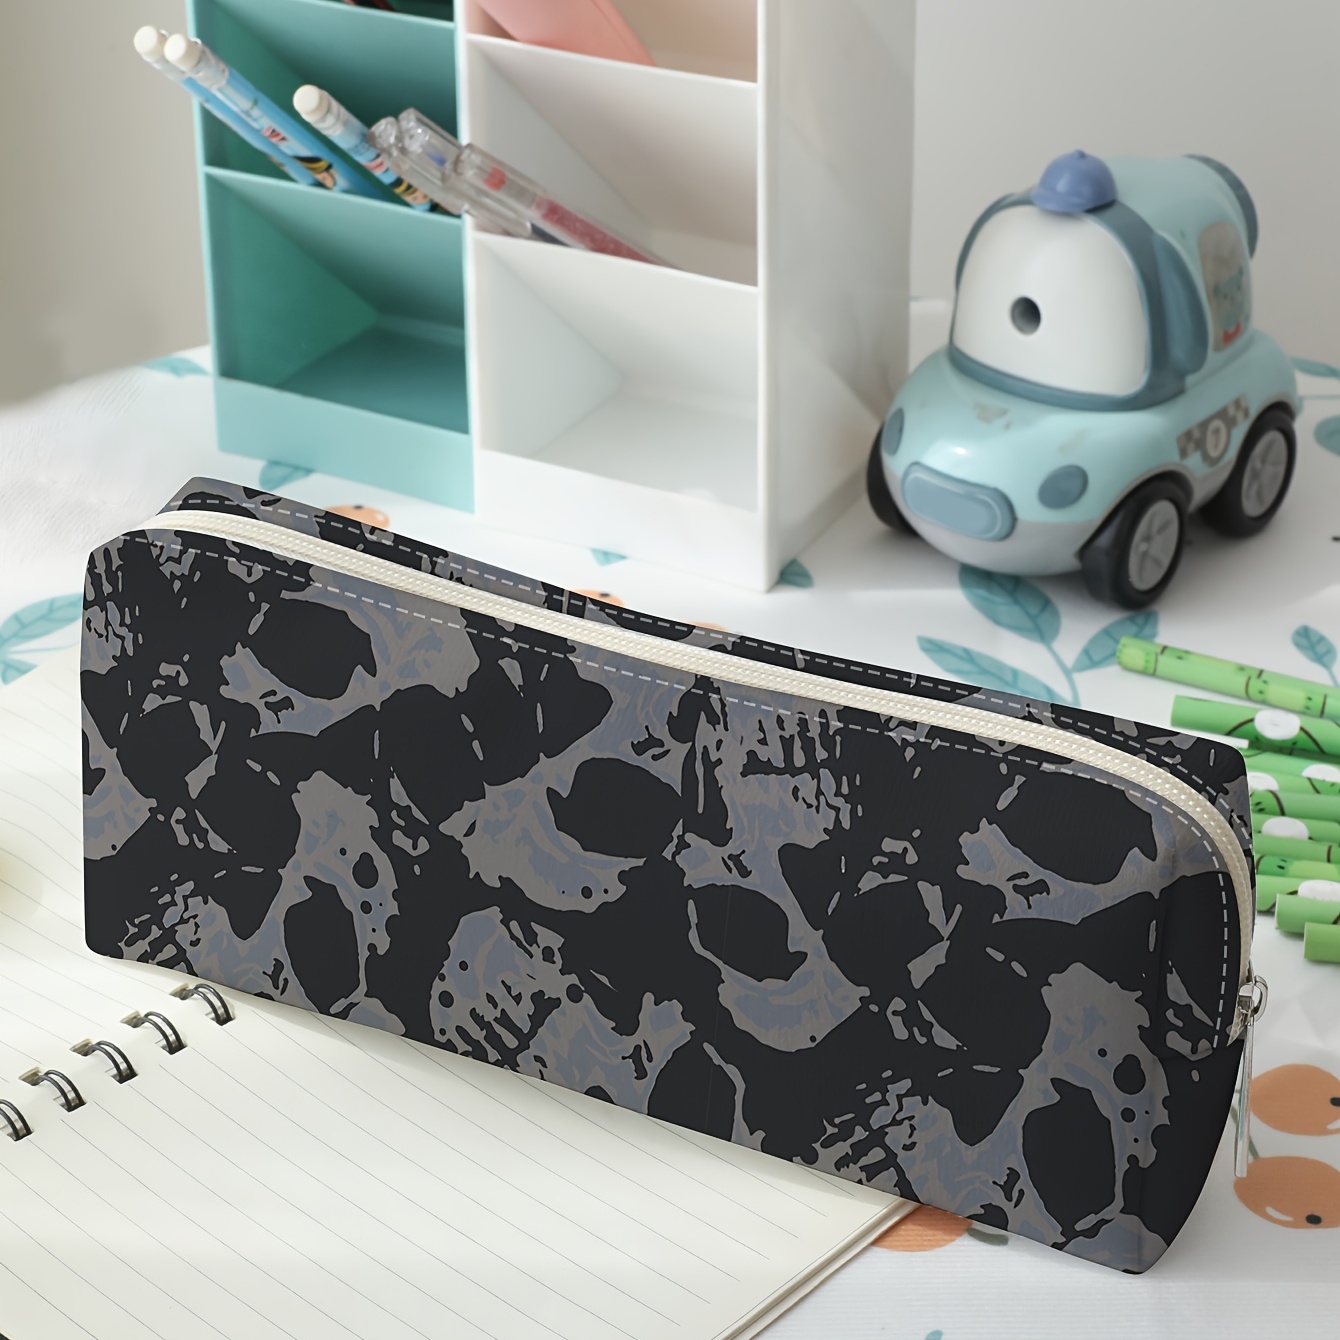 New Concise Solid color Girls student pencil case school pencil